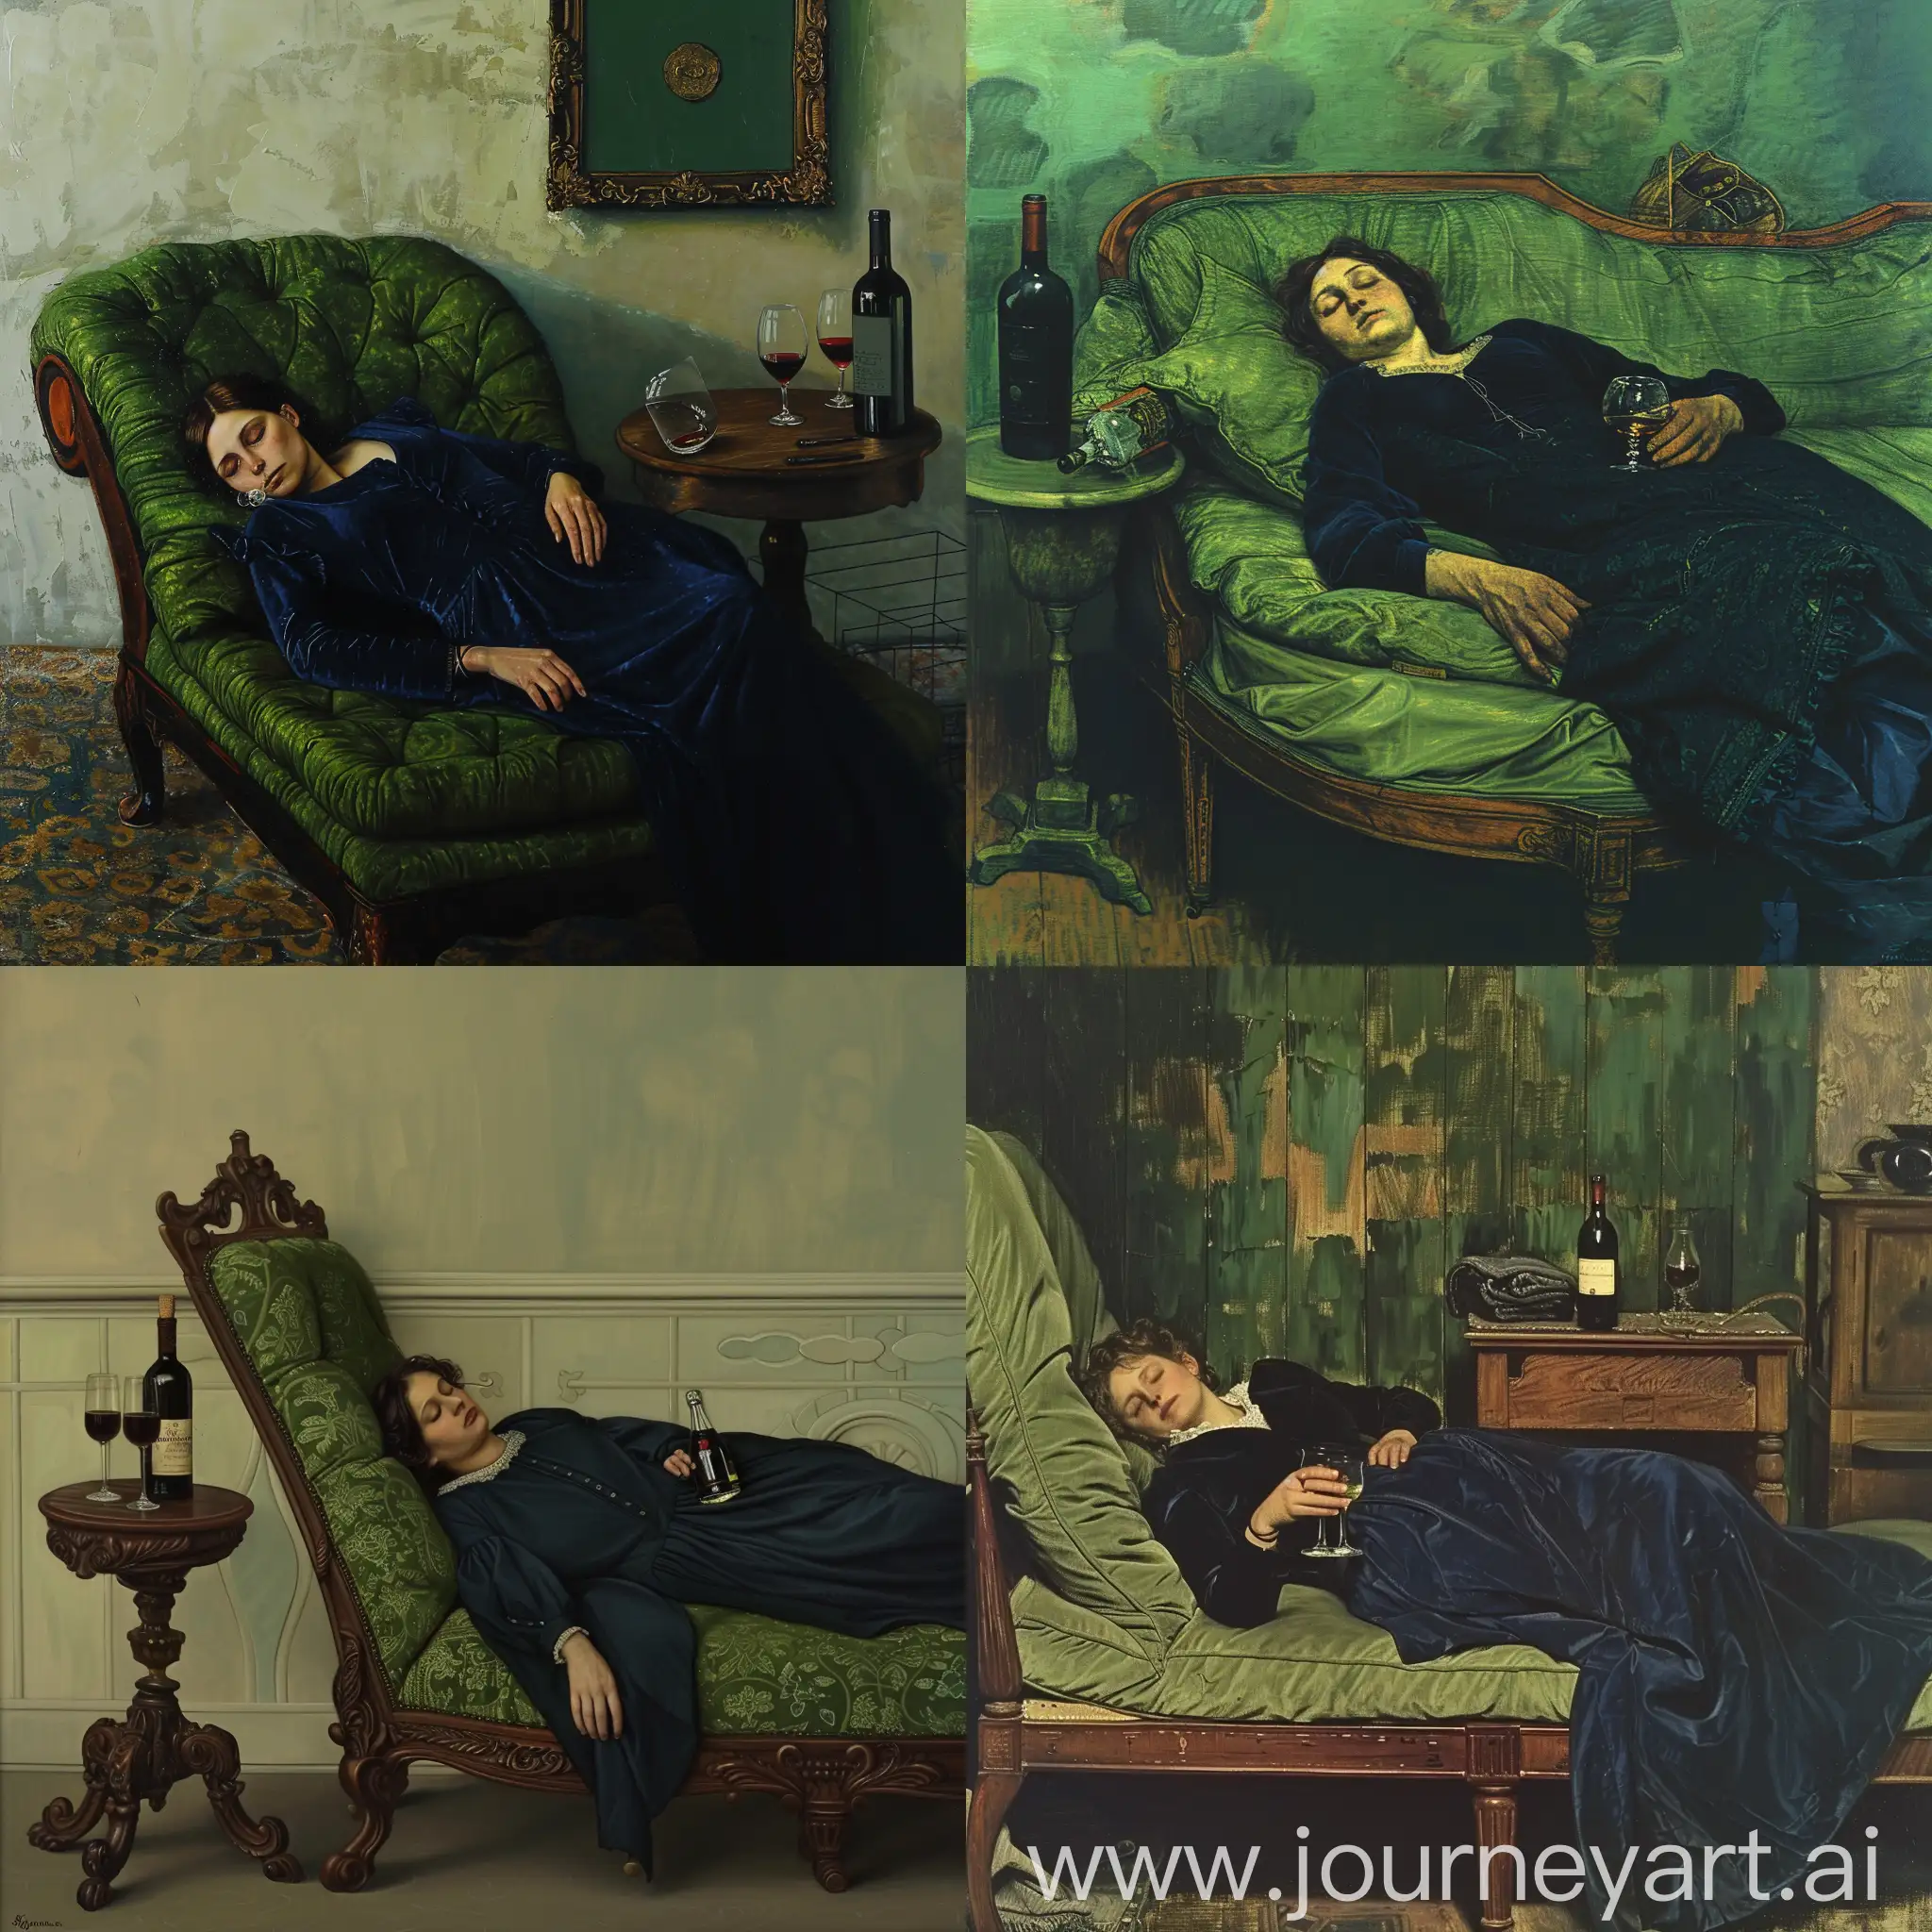 using a 19th century oil painting artistic style create a picture of a woman passed out drunk on a chaise longue, with an empty glass and bottle of wine on a table next to her. use green as the colour of the chaise longue the woman needs to be dressed in a dark blue